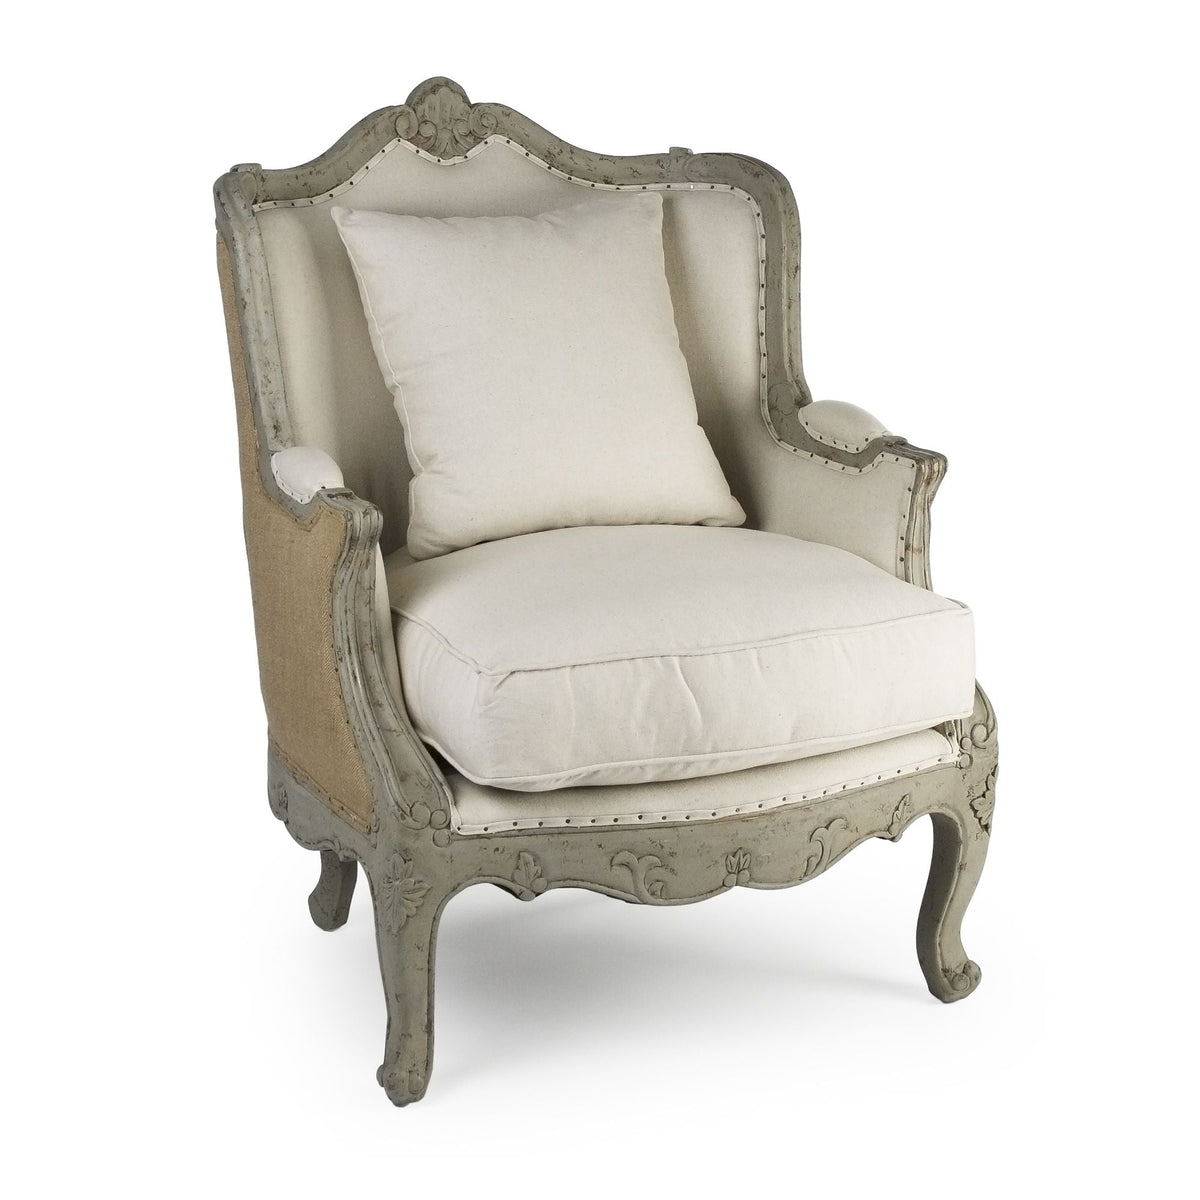 Adele Love Chair by Zentique